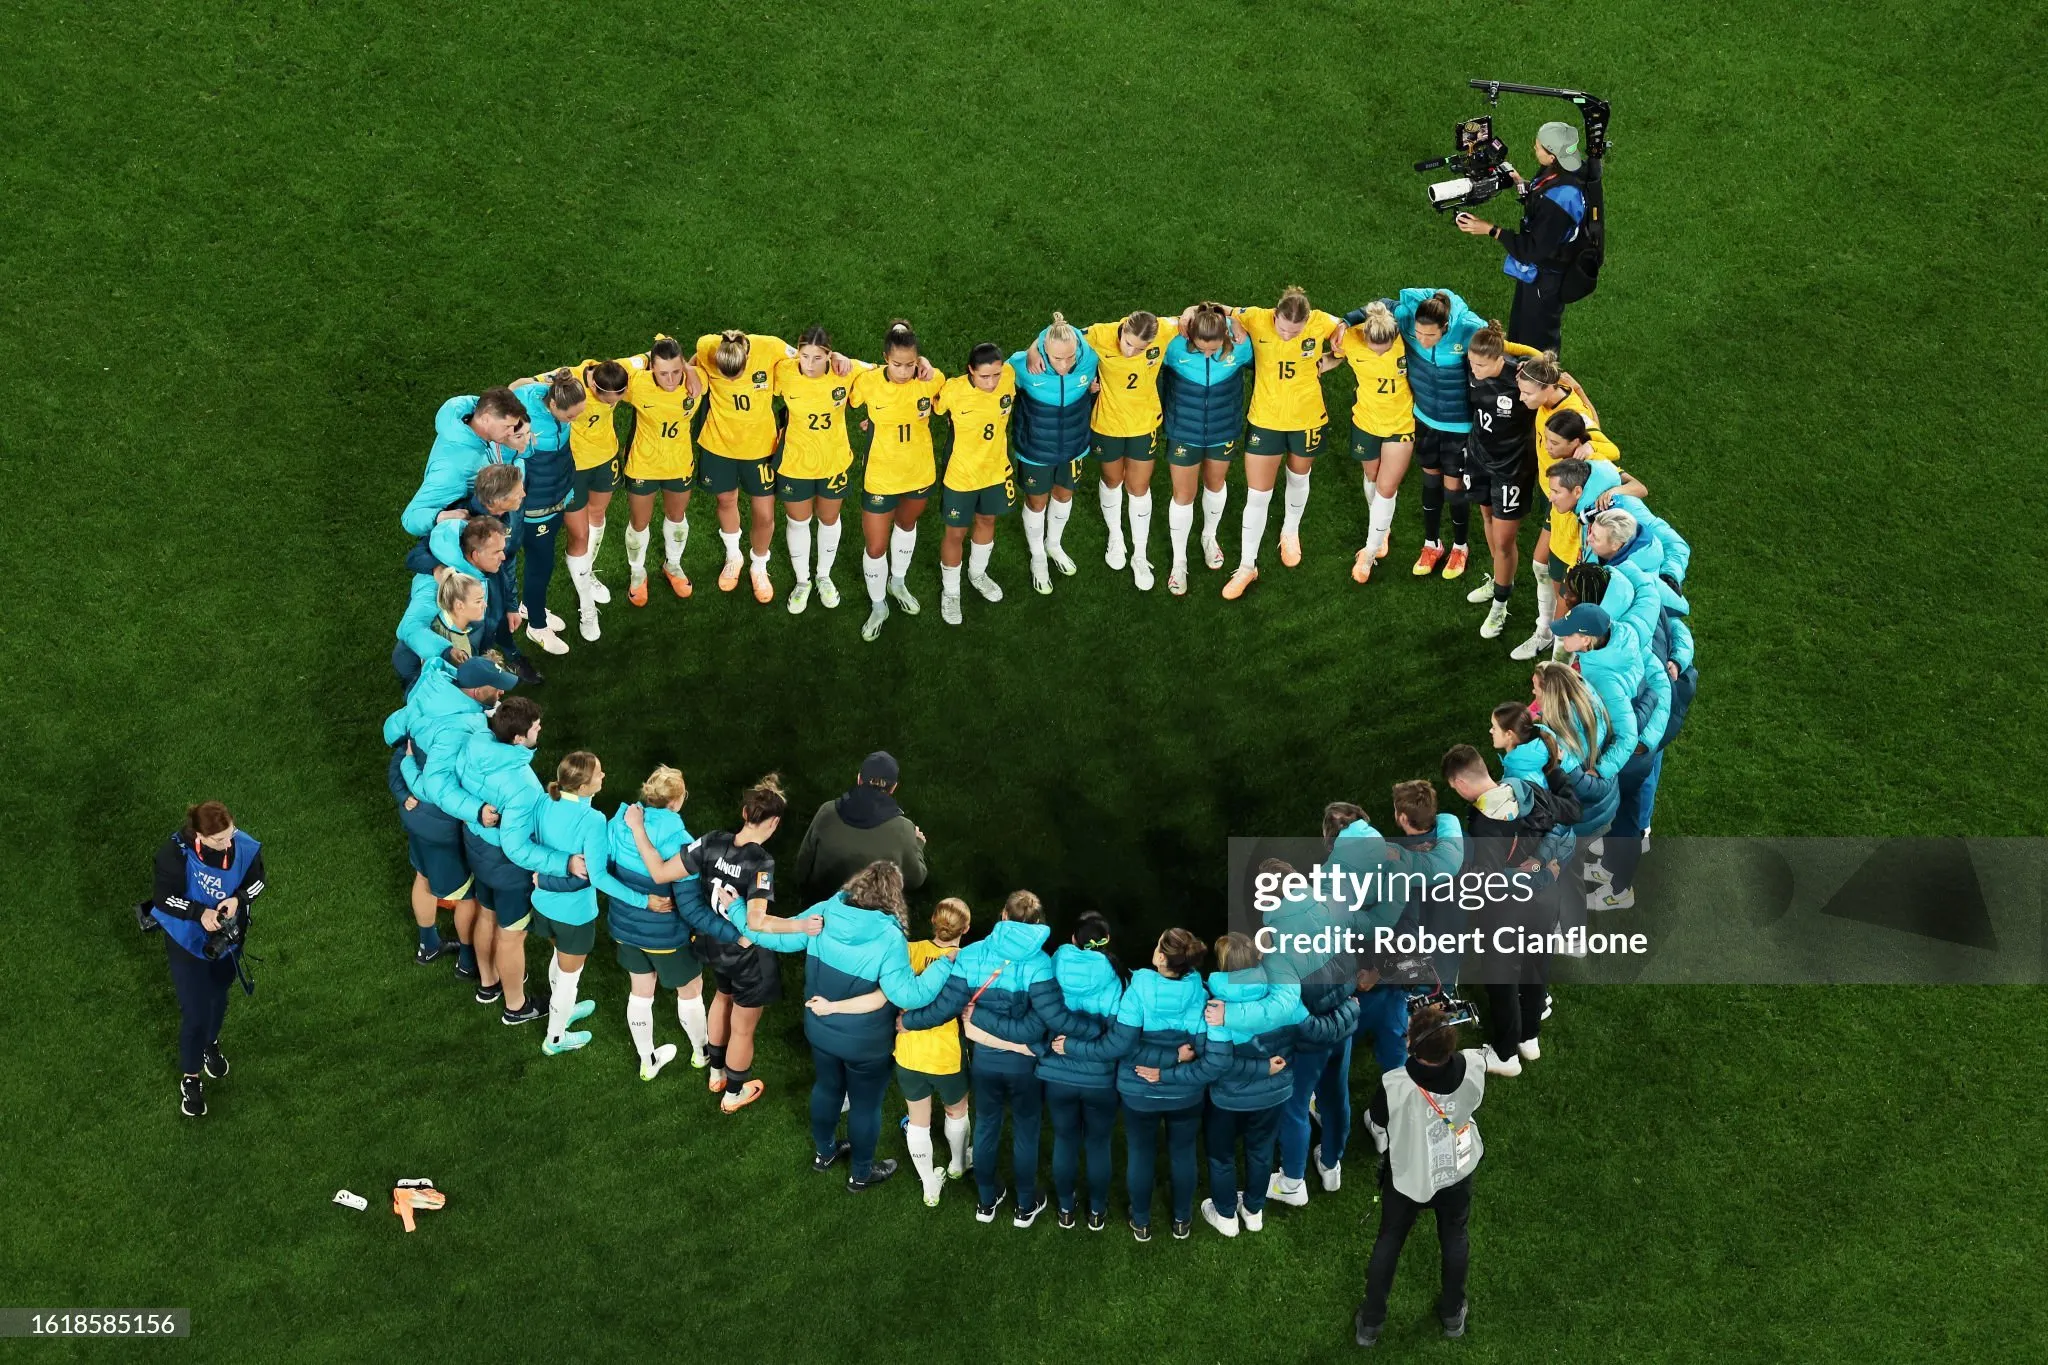 SYDNEY, AUSTRALIA - AUGUST 16: Australia players huddle after the team's 1-3 defeat following the FIFA Women's World Cup Australia & New Zealand 2023 Semi Final match between Australia and England at Stadium Australia on August 16, 2023 in Sydney, Australia.  Photo by Robert Cianflone/Getty Images.